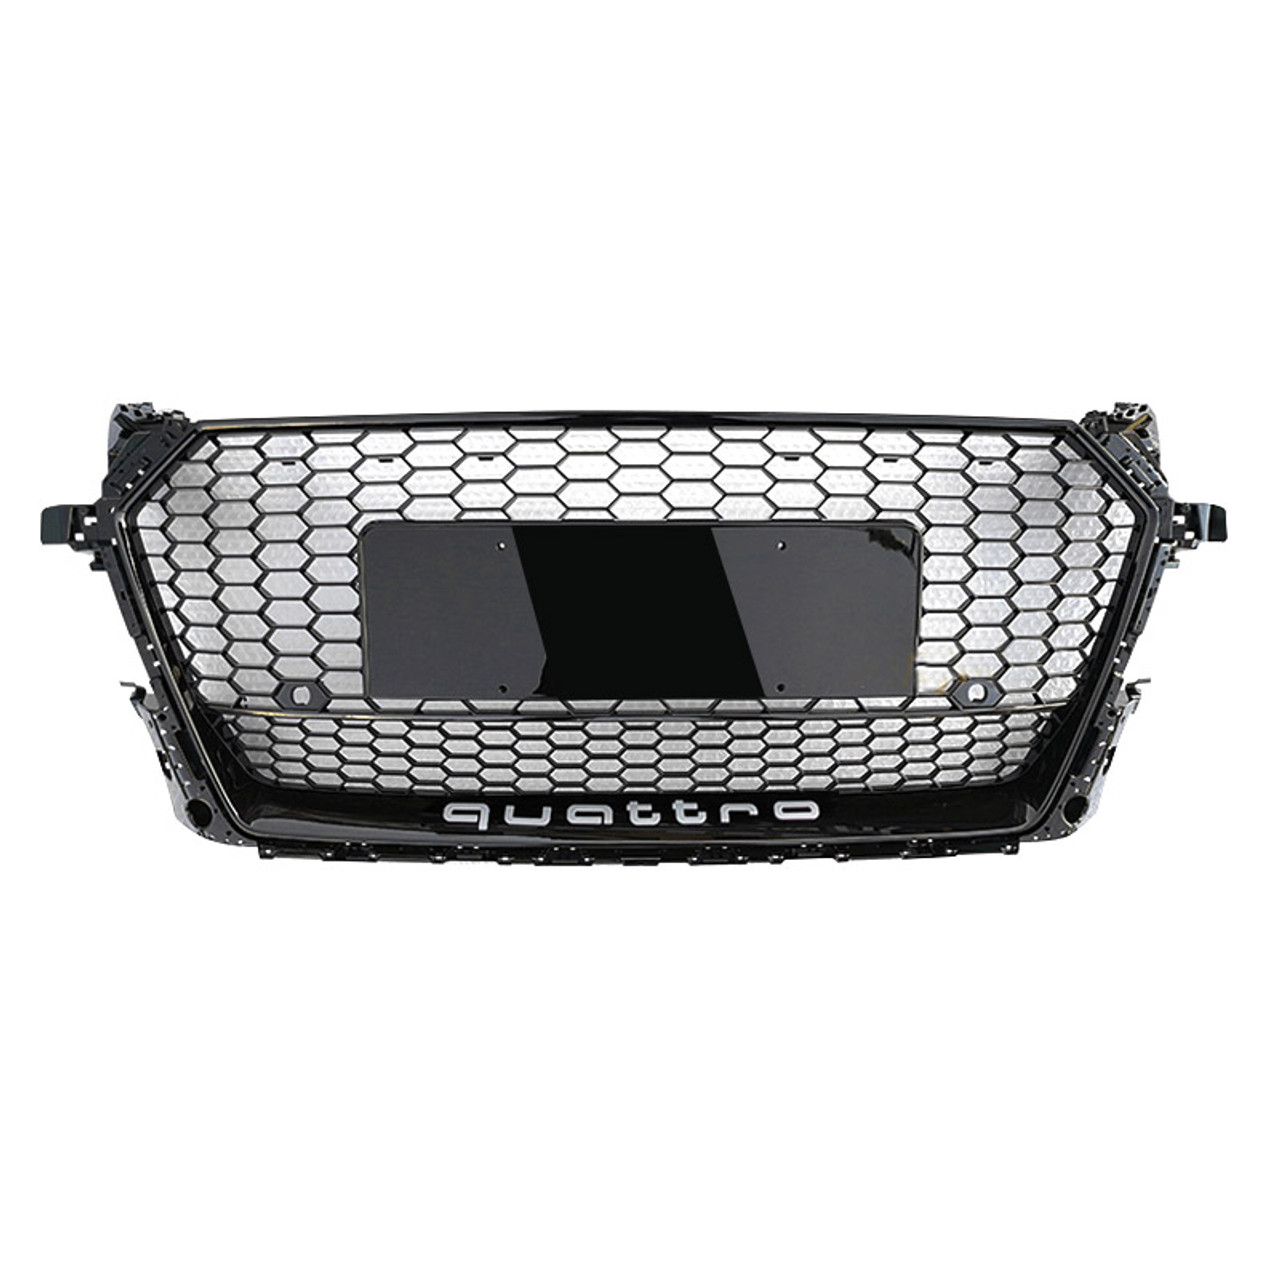 RS4 gloss black honeycomb mesh grill for Audi A4 B9 8W S4 2016+